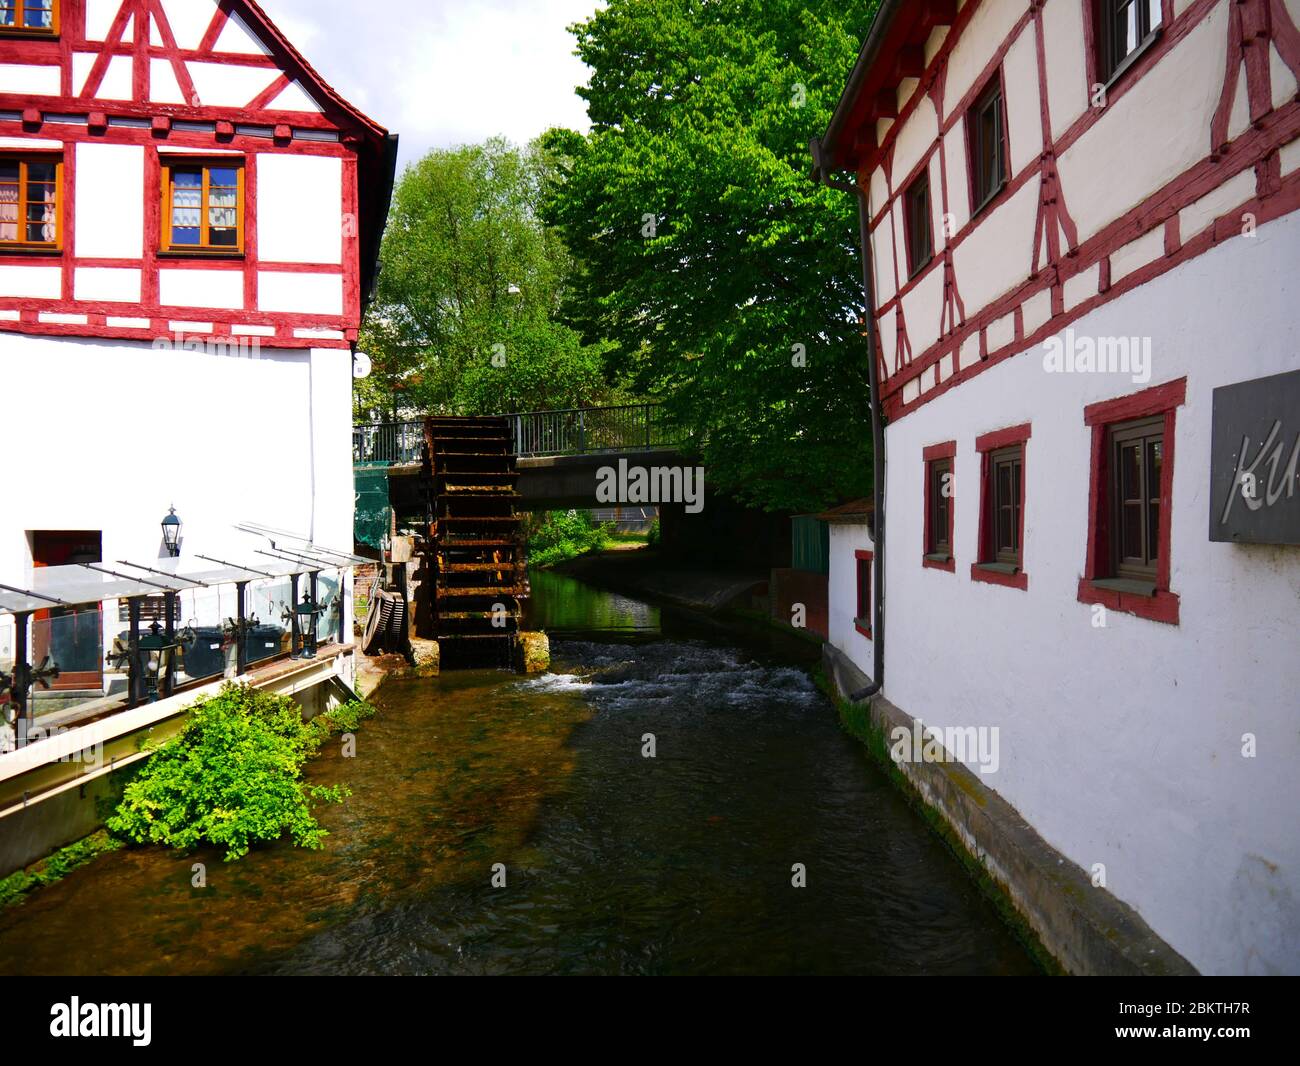 Ulm, Germany: A mill in the Fishermen quartier Stock Photo